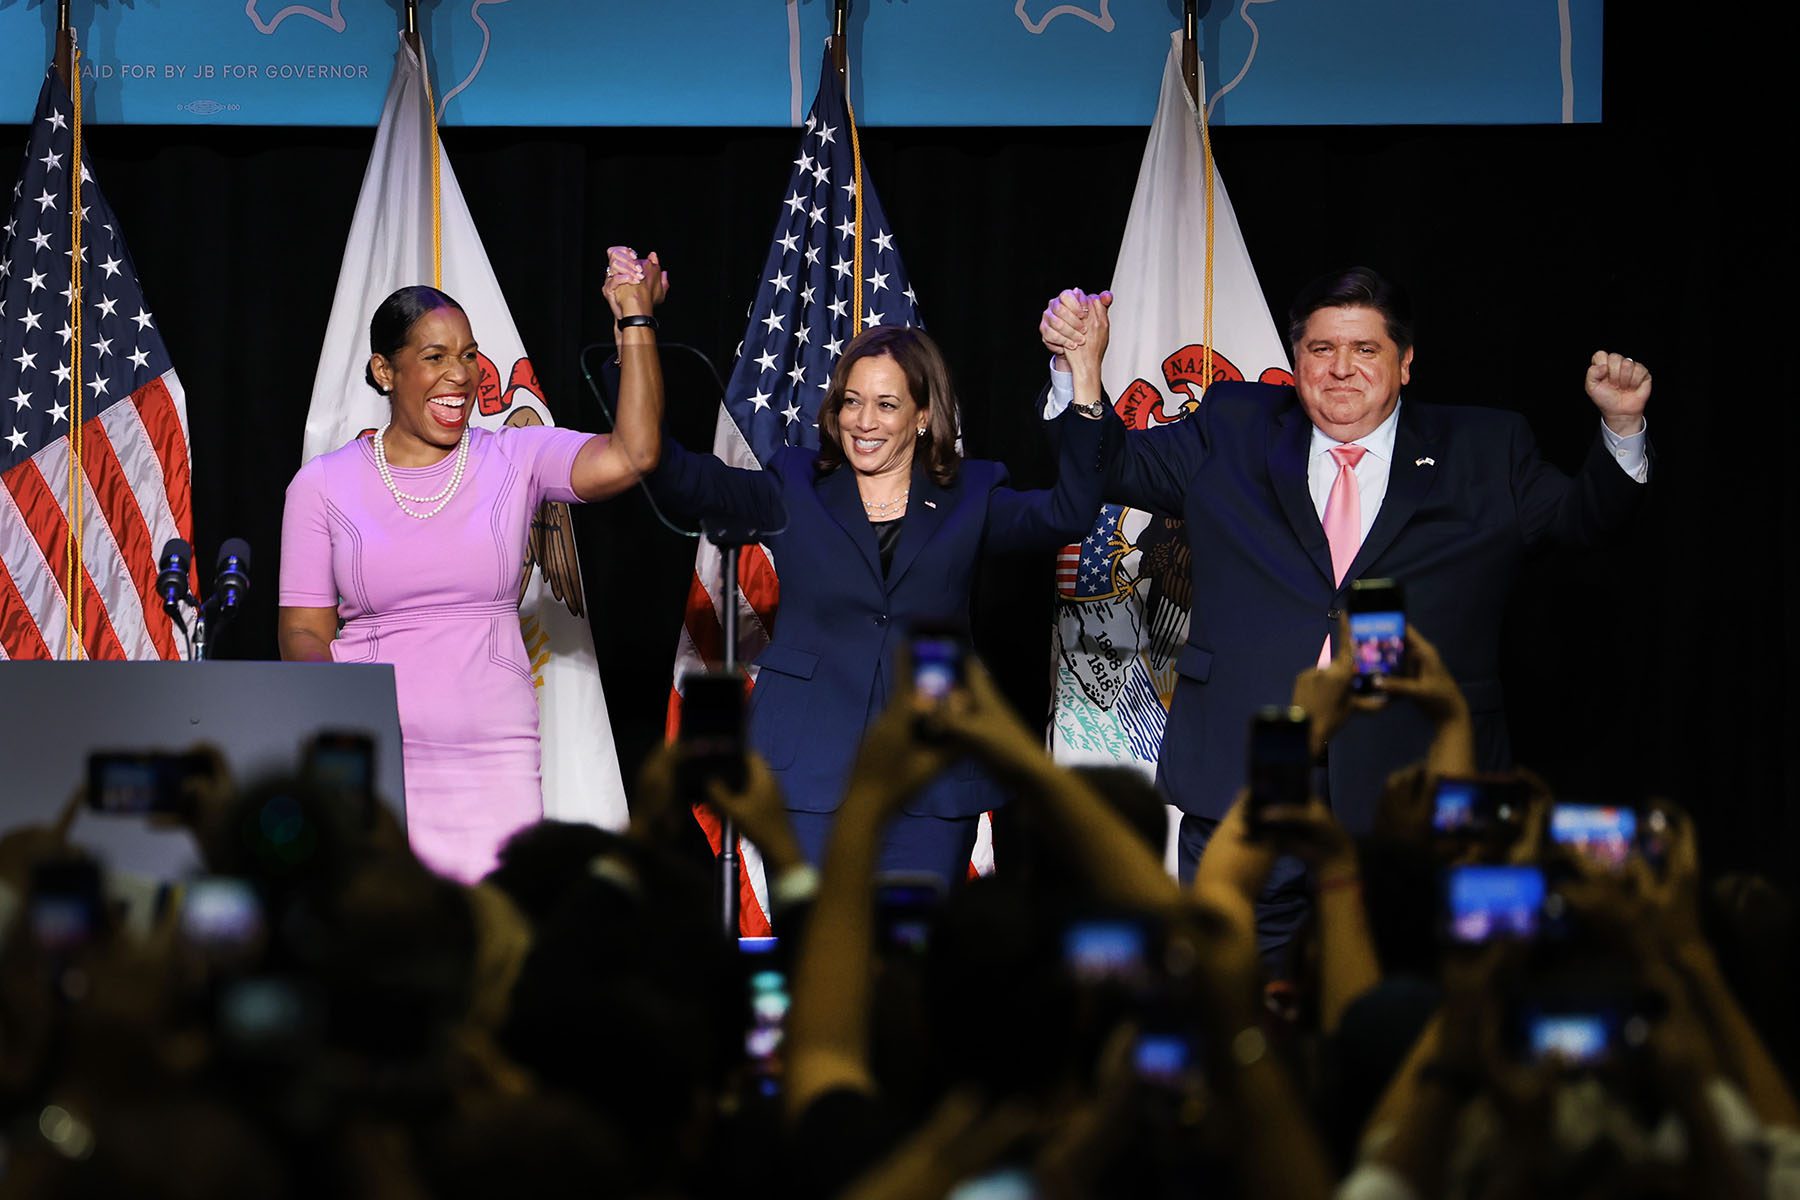 Kamala Harris, Lt. Governor Juliana Stratton and Governor J.B. Pritzker hold hands and salute the crowd from a stage.